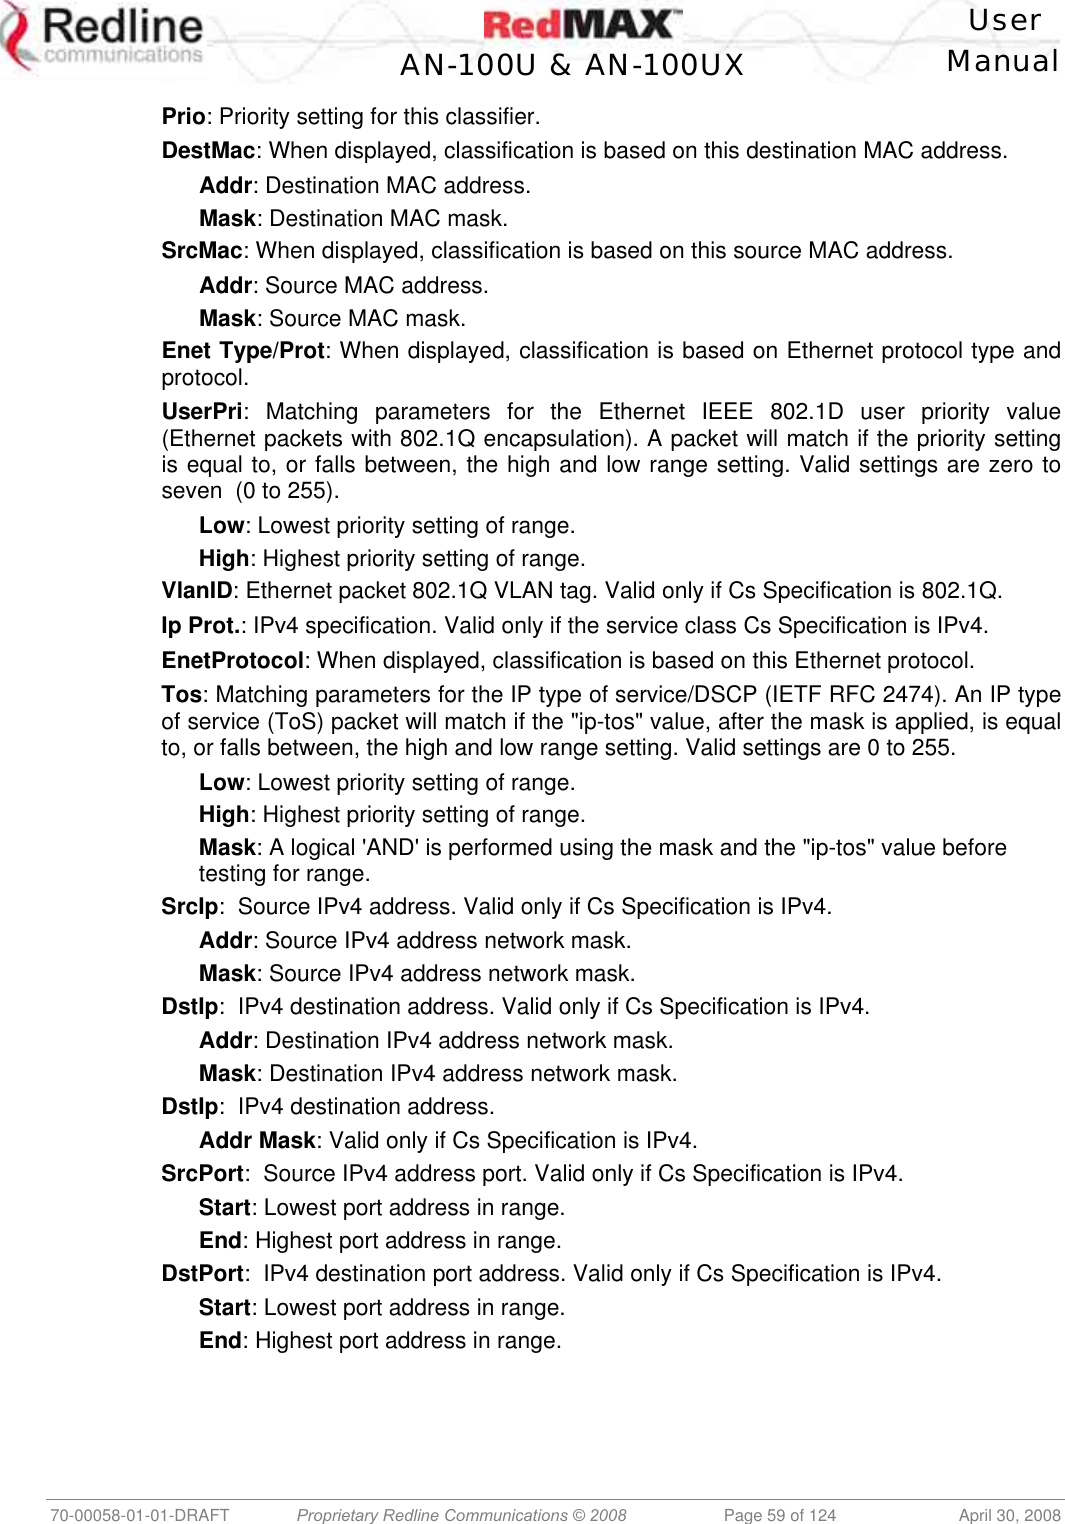    User  AN-100U &amp; AN-100UX Manual   70-00058-01-01-DRAFT  Proprietary Redline Communications © 2008   Page 59 of 124  April 30, 2008 Prio: Priority setting for this classifier. DestMac: When displayed, classification is based on this destination MAC address. Addr: Destination MAC address. Mask: Destination MAC mask. SrcMac: When displayed, classification is based on this source MAC address. Addr: Source MAC address. Mask: Source MAC mask. Enet Type/Prot: When displayed, classification is based on Ethernet protocol type and protocol. UserPri: Matching parameters for the Ethernet IEEE 802.1D user priority value (Ethernet packets with 802.1Q encapsulation). A packet will match if the priority setting is equal to, or falls between, the high and low range setting. Valid settings are zero to seven  (0 to 255). Low: Lowest priority setting of range. High: Highest priority setting of range. VlanID: Ethernet packet 802.1Q VLAN tag. Valid only if Cs Specification is 802.1Q. Ip Prot.: IPv4 specification. Valid only if the service class Cs Specification is IPv4. EnetProtocol: When displayed, classification is based on this Ethernet protocol. Tos: Matching parameters for the IP type of service/DSCP (IETF RFC 2474). An IP type of service (ToS) packet will match if the &quot;ip-tos&quot; value, after the mask is applied, is equal to, or falls between, the high and low range setting. Valid settings are 0 to 255. Low: Lowest priority setting of range. High: Highest priority setting of range. Mask: A logical &apos;AND&apos; is performed using the mask and the &quot;ip-tos&quot; value before testing for range. SrcIp:  Source IPv4 address. Valid only if Cs Specification is IPv4. Addr: Source IPv4 address network mask. Mask: Source IPv4 address network mask. DstIp:  IPv4 destination address. Valid only if Cs Specification is IPv4. Addr: Destination IPv4 address network mask. Mask: Destination IPv4 address network mask. DstIp:  IPv4 destination address. Addr Mask: Valid only if Cs Specification is IPv4. SrcPort:  Source IPv4 address port. Valid only if Cs Specification is IPv4. Start: Lowest port address in range. End: Highest port address in range. DstPort:  IPv4 destination port address. Valid only if Cs Specification is IPv4. Start: Lowest port address in range. End: Highest port address in range. 